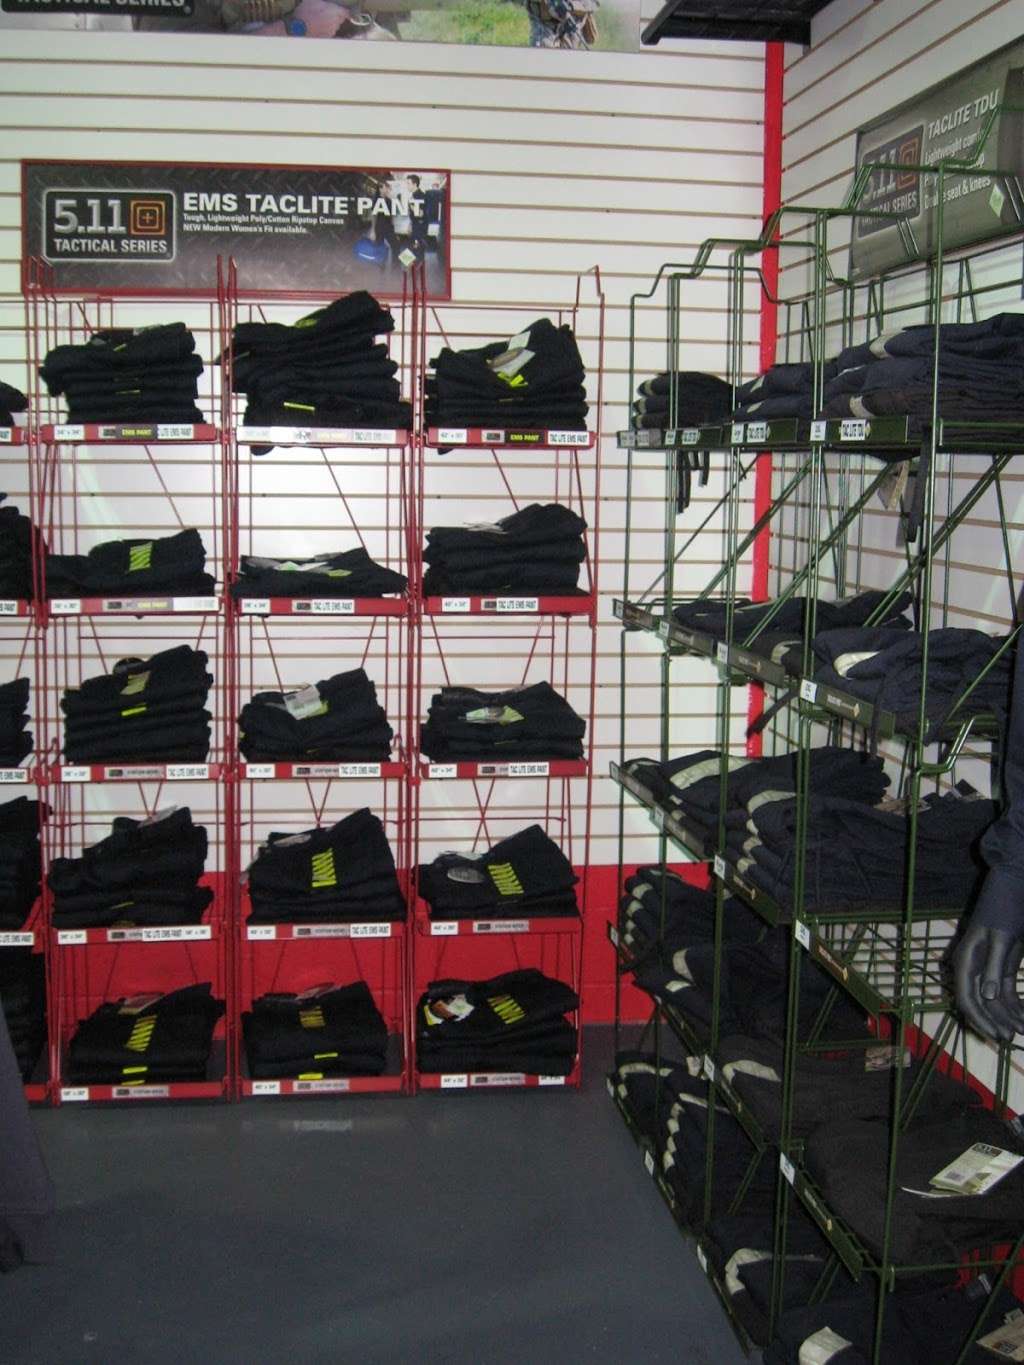 Turn Out Uniforms | 195 Paterson Ave, Little Falls, NJ 07424 | Phone: (973) 200-0950